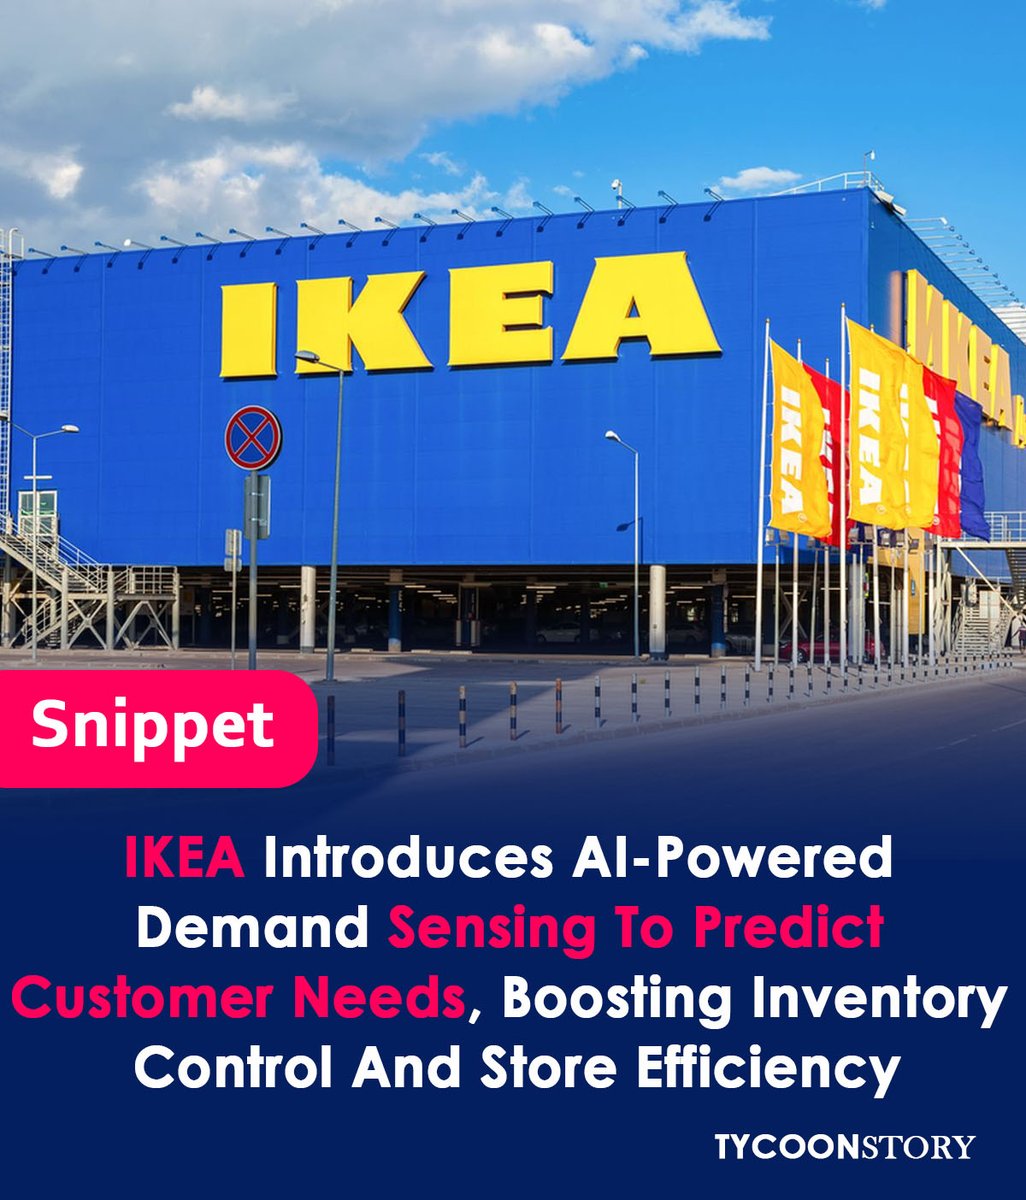 IKEA leverages AI to predict local, short-term demand, boosting inventory control and store efficiency
#sensingtool #omnichannelstrategy #ikeastore #stakeholders #ai #customersatisfaction #business  #retailtech #inventorymanagement #predictiveanalytics #omnichannelretail